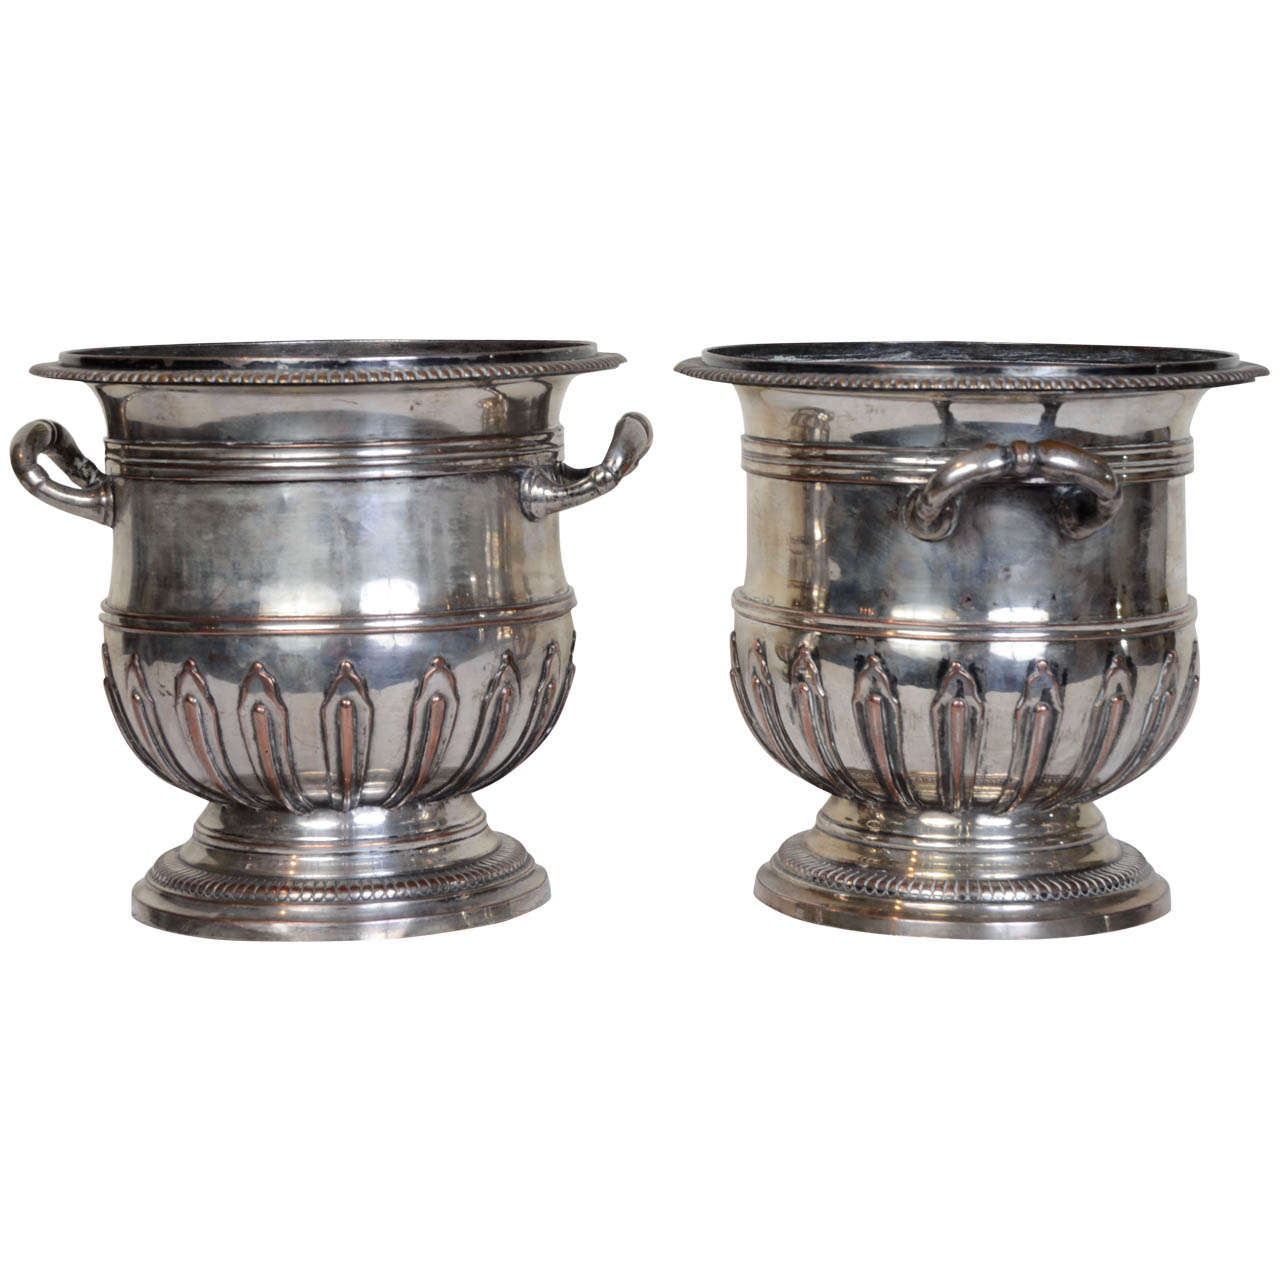 Pair of French Regence Period Cooler Buckets For Sale